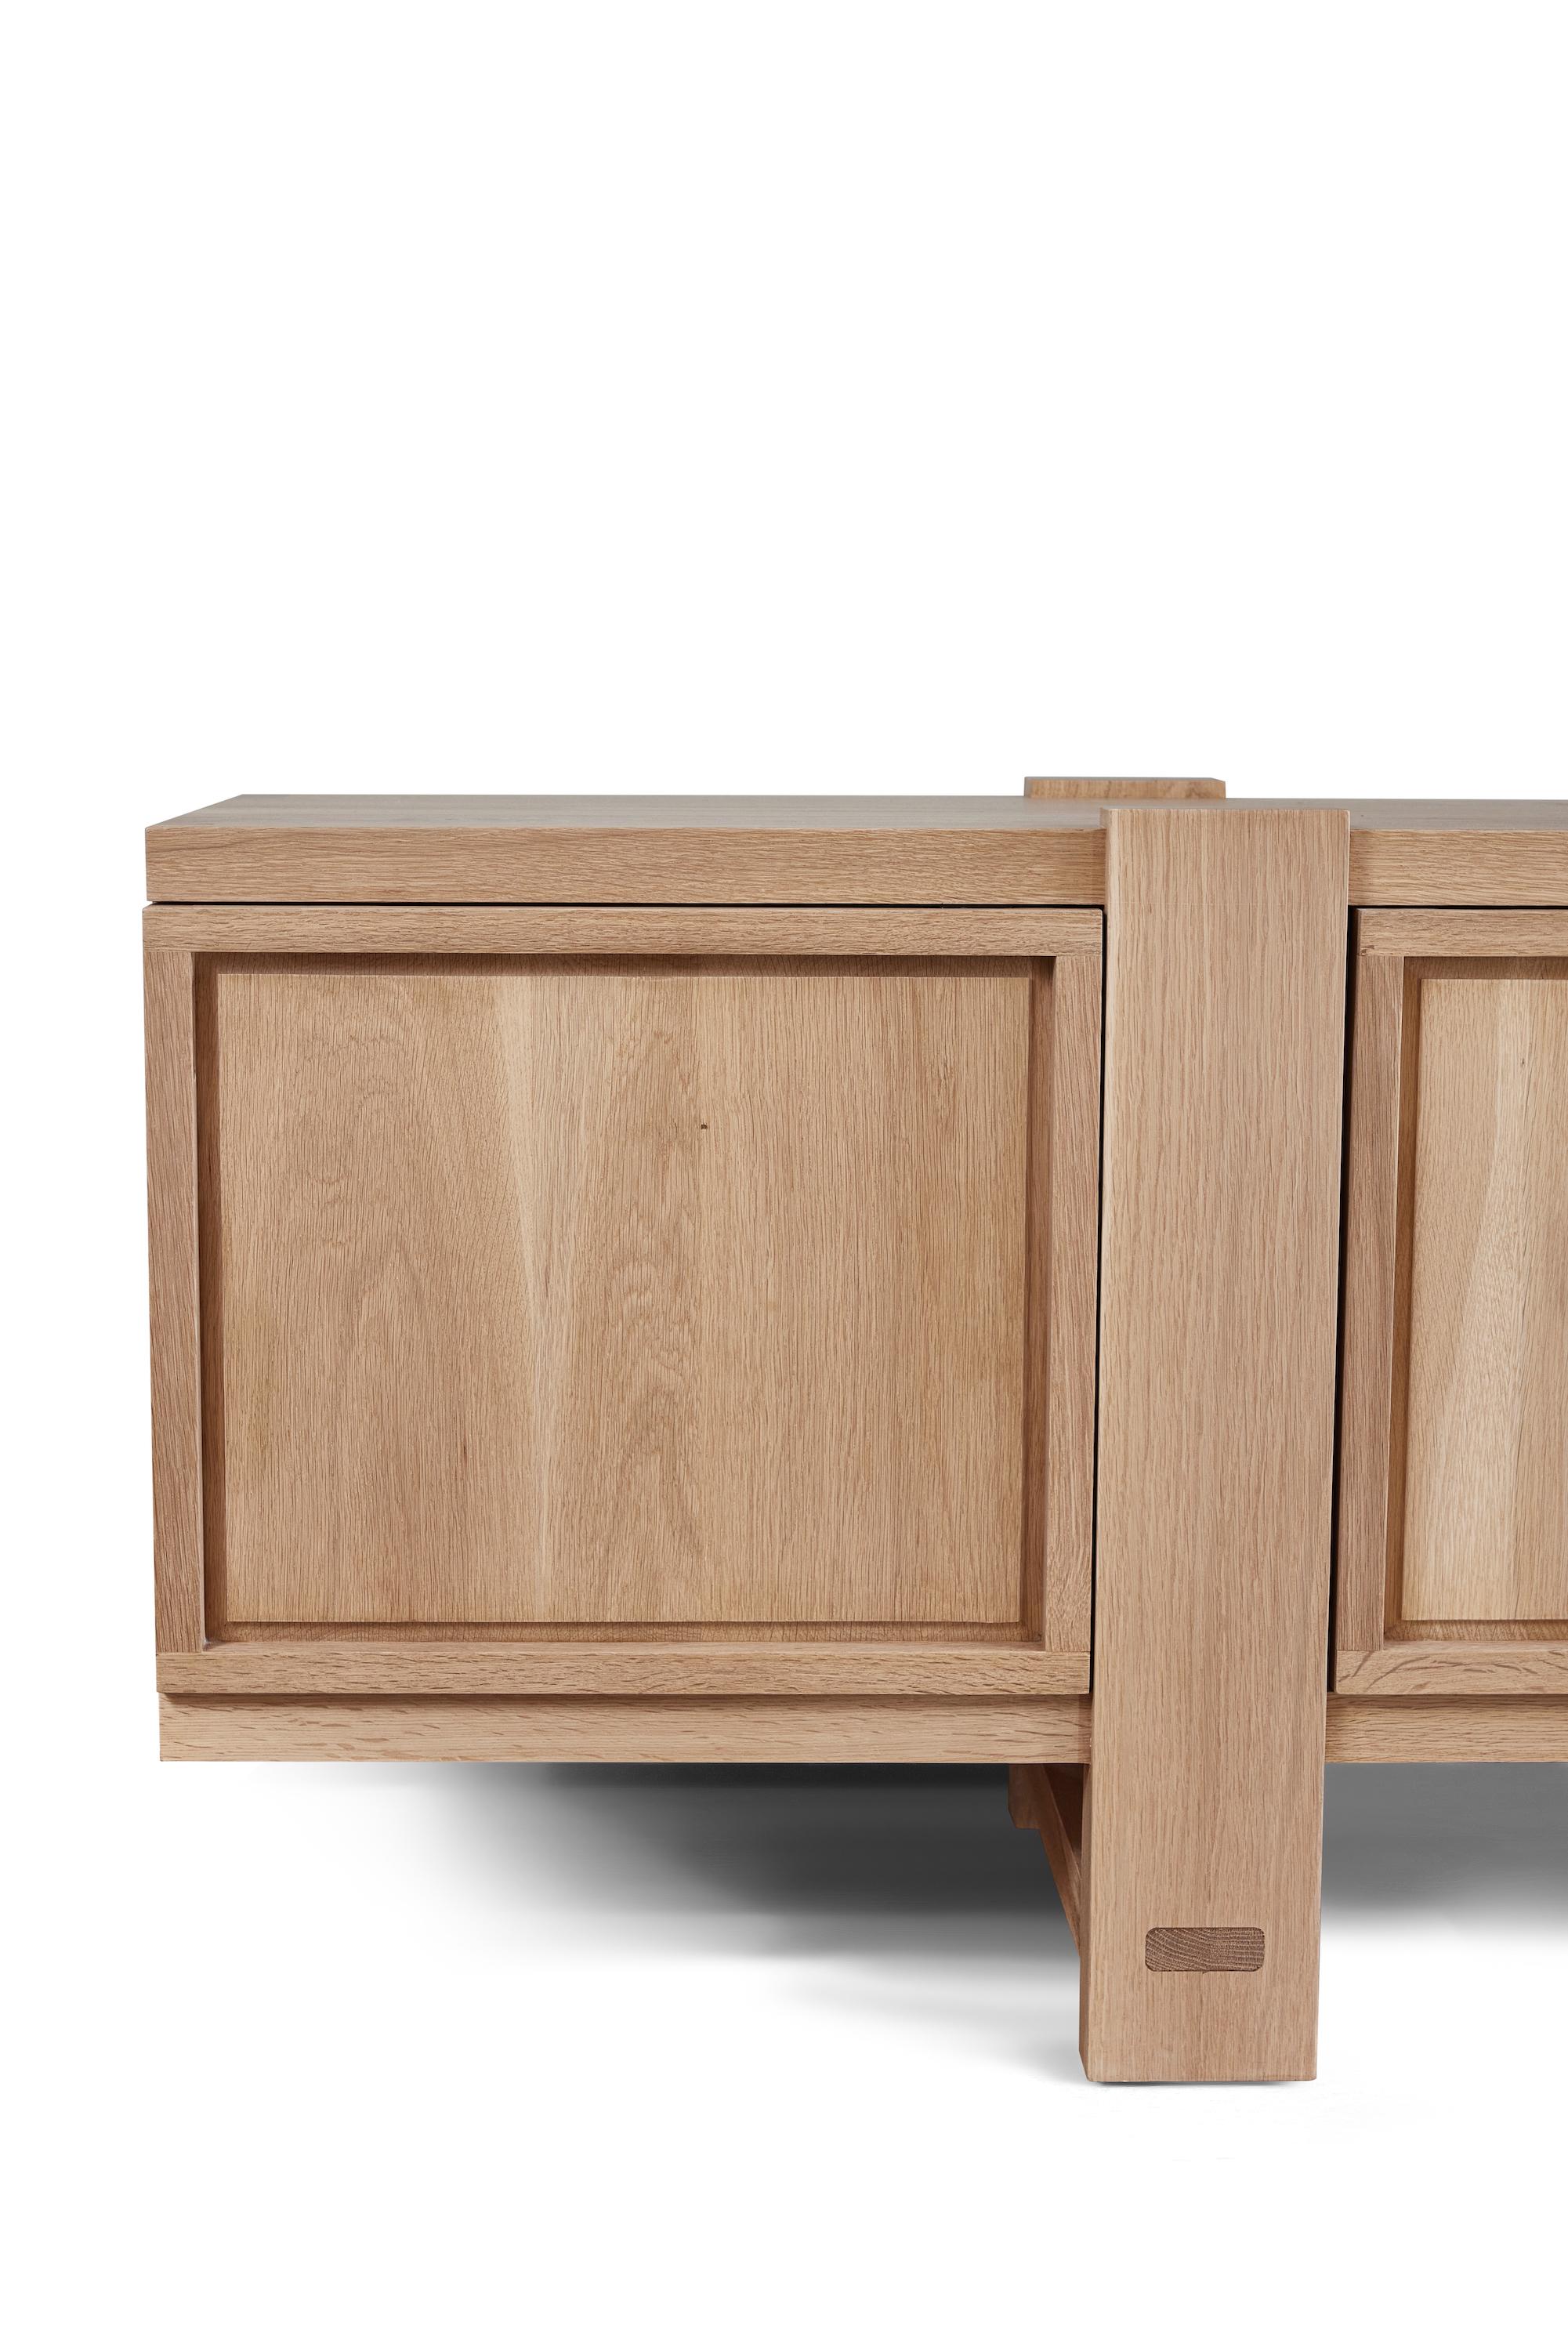 Joinery Lake Credenza in White Oak, with Interior Drawers, by August Abode For Sale